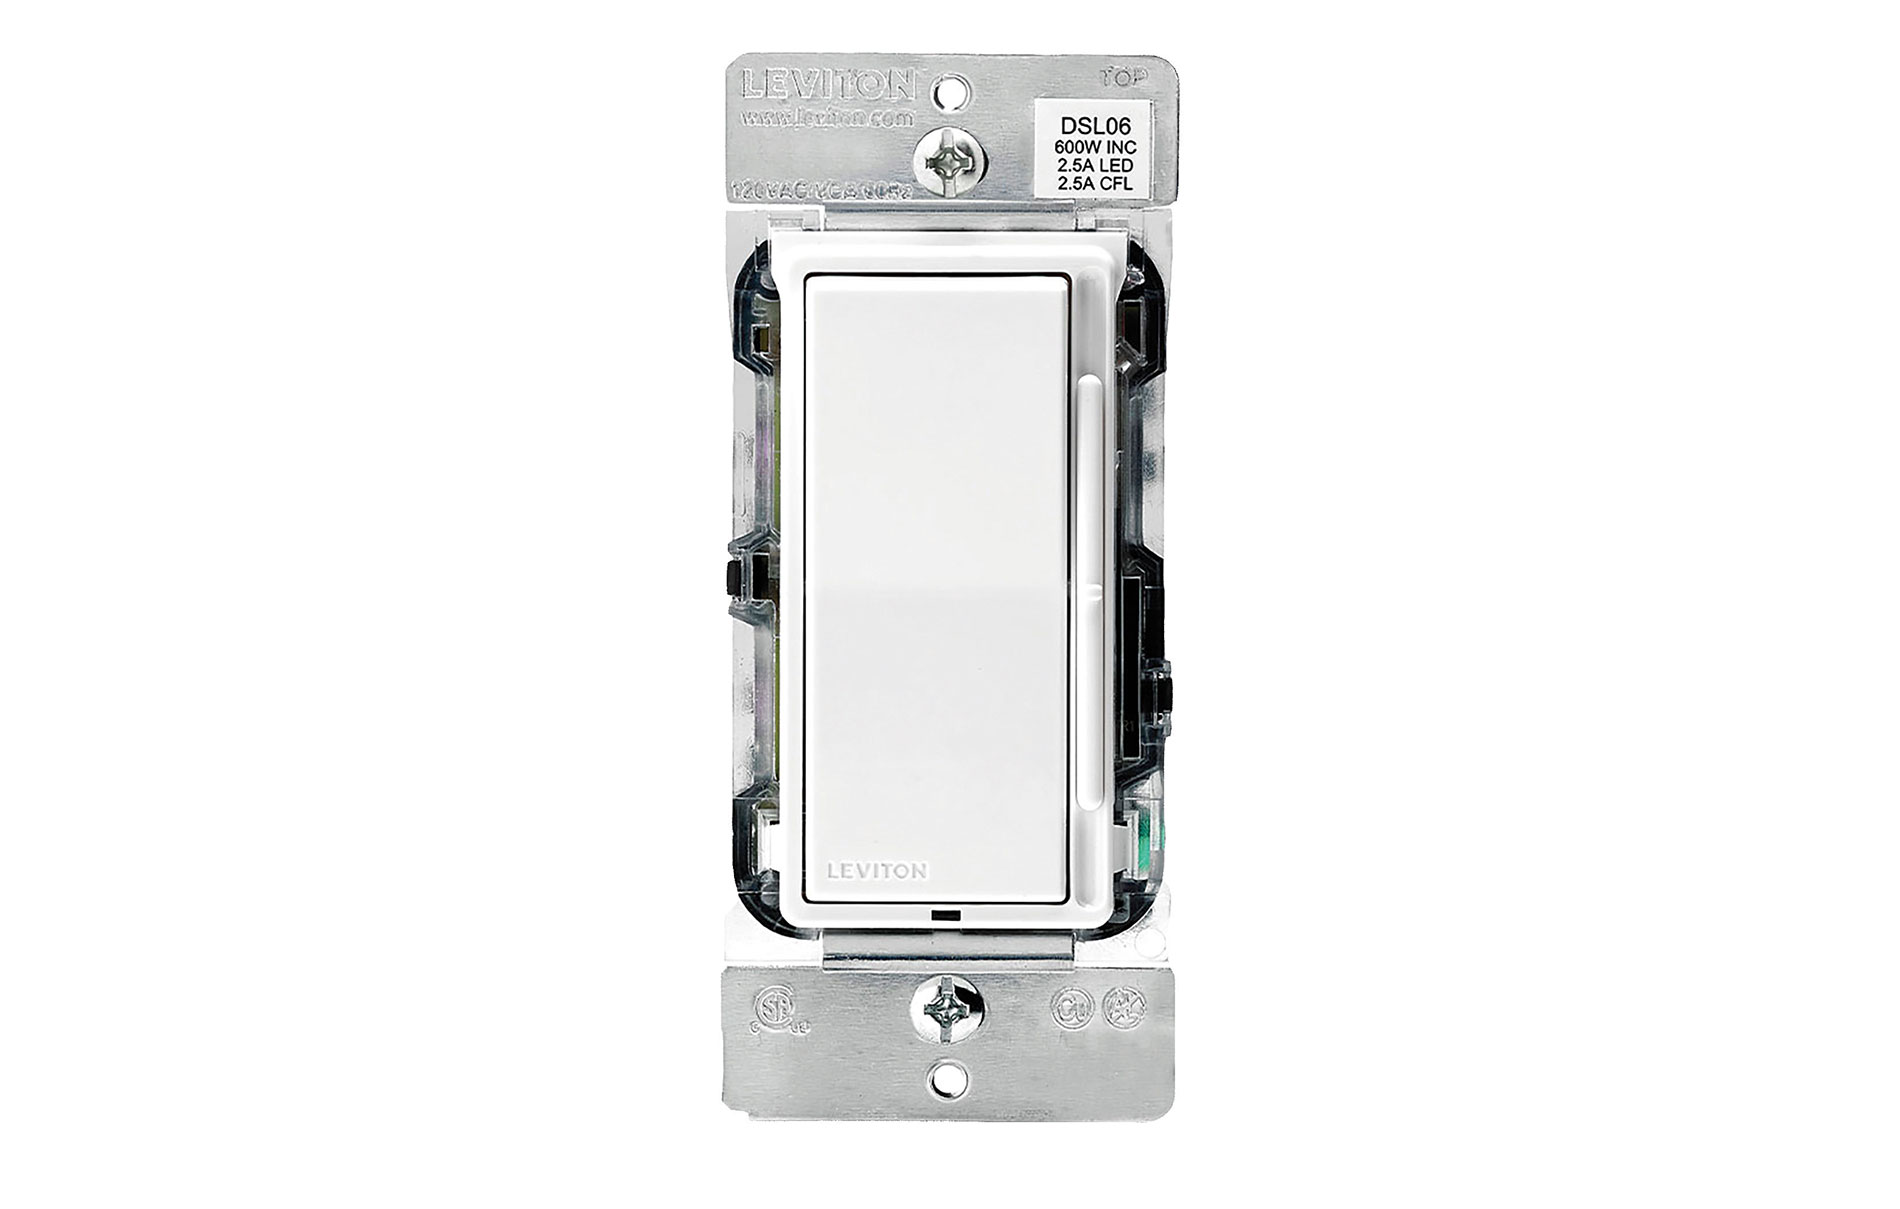 Metal and white slide dimmer switch. Image by Leviton.